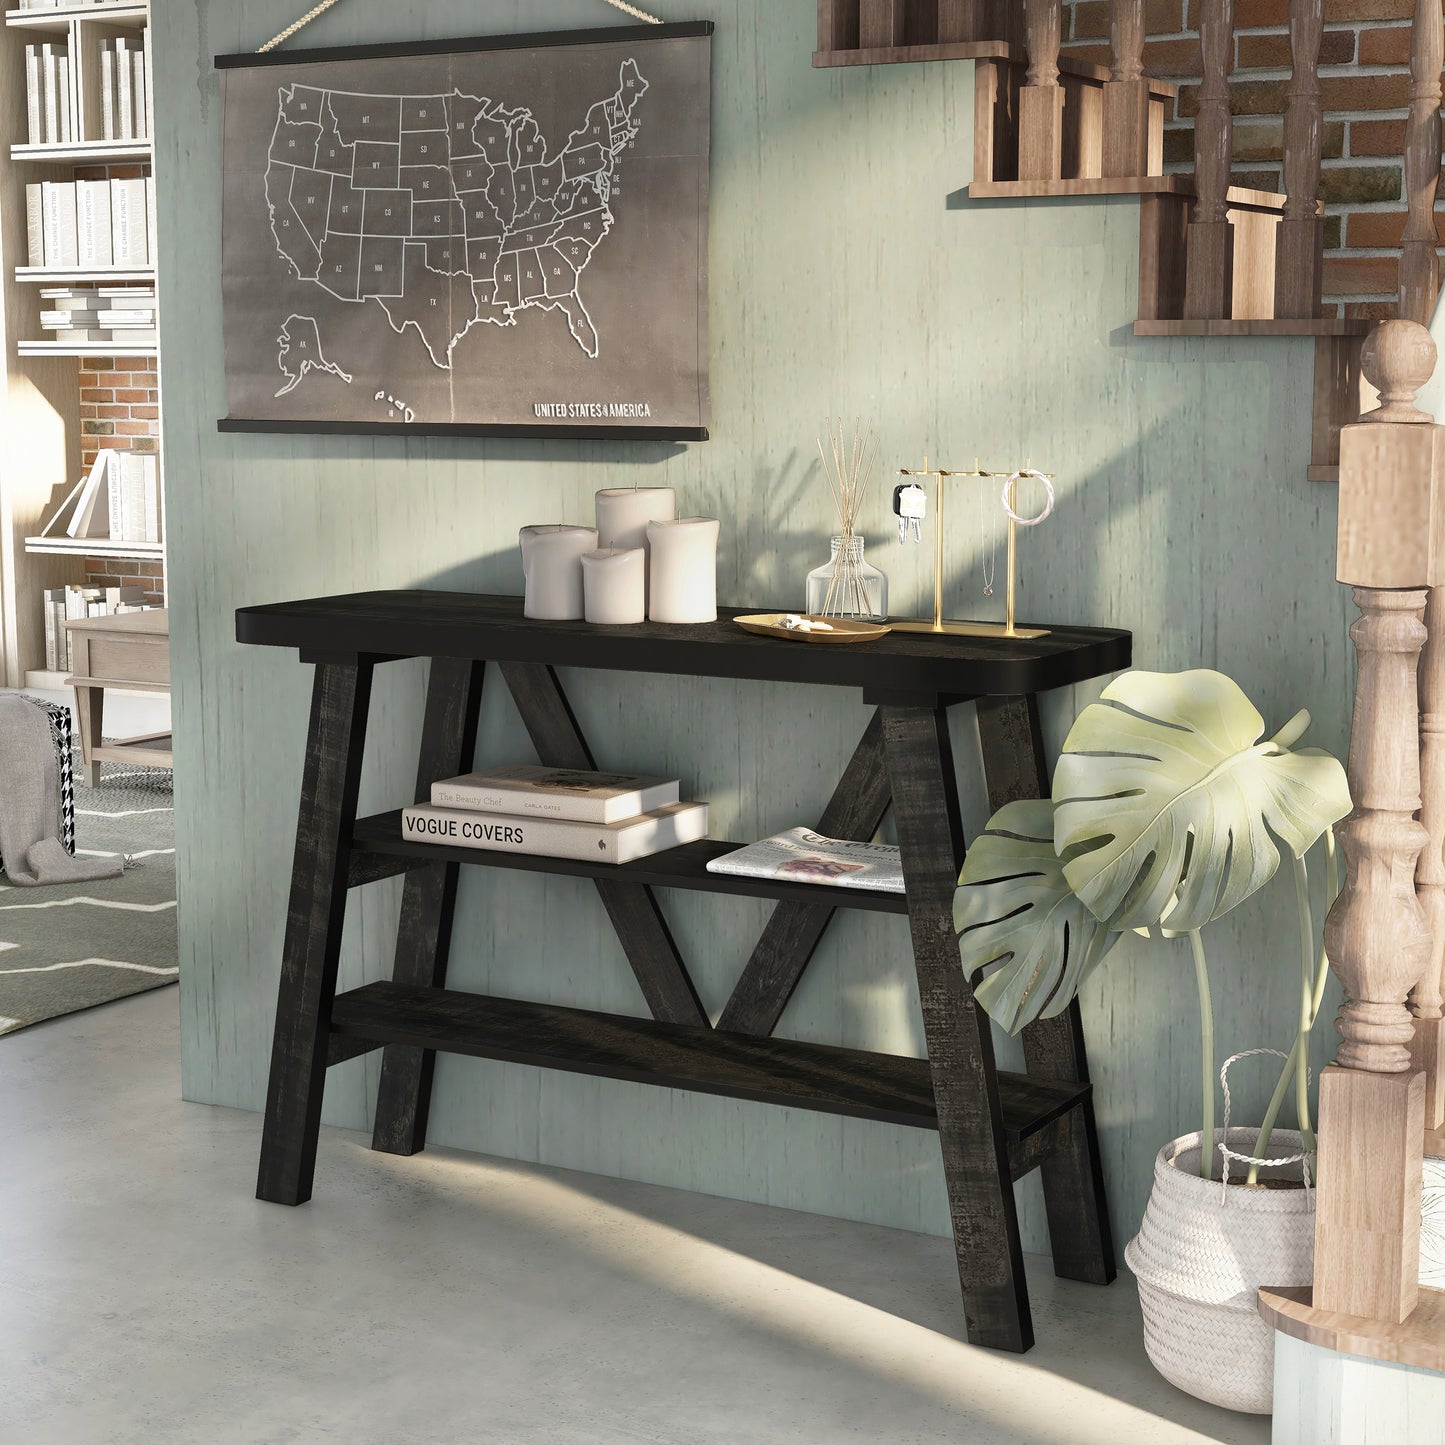 Left angled farmhouse reclaimed black two-shelf console table in a living area with accessories